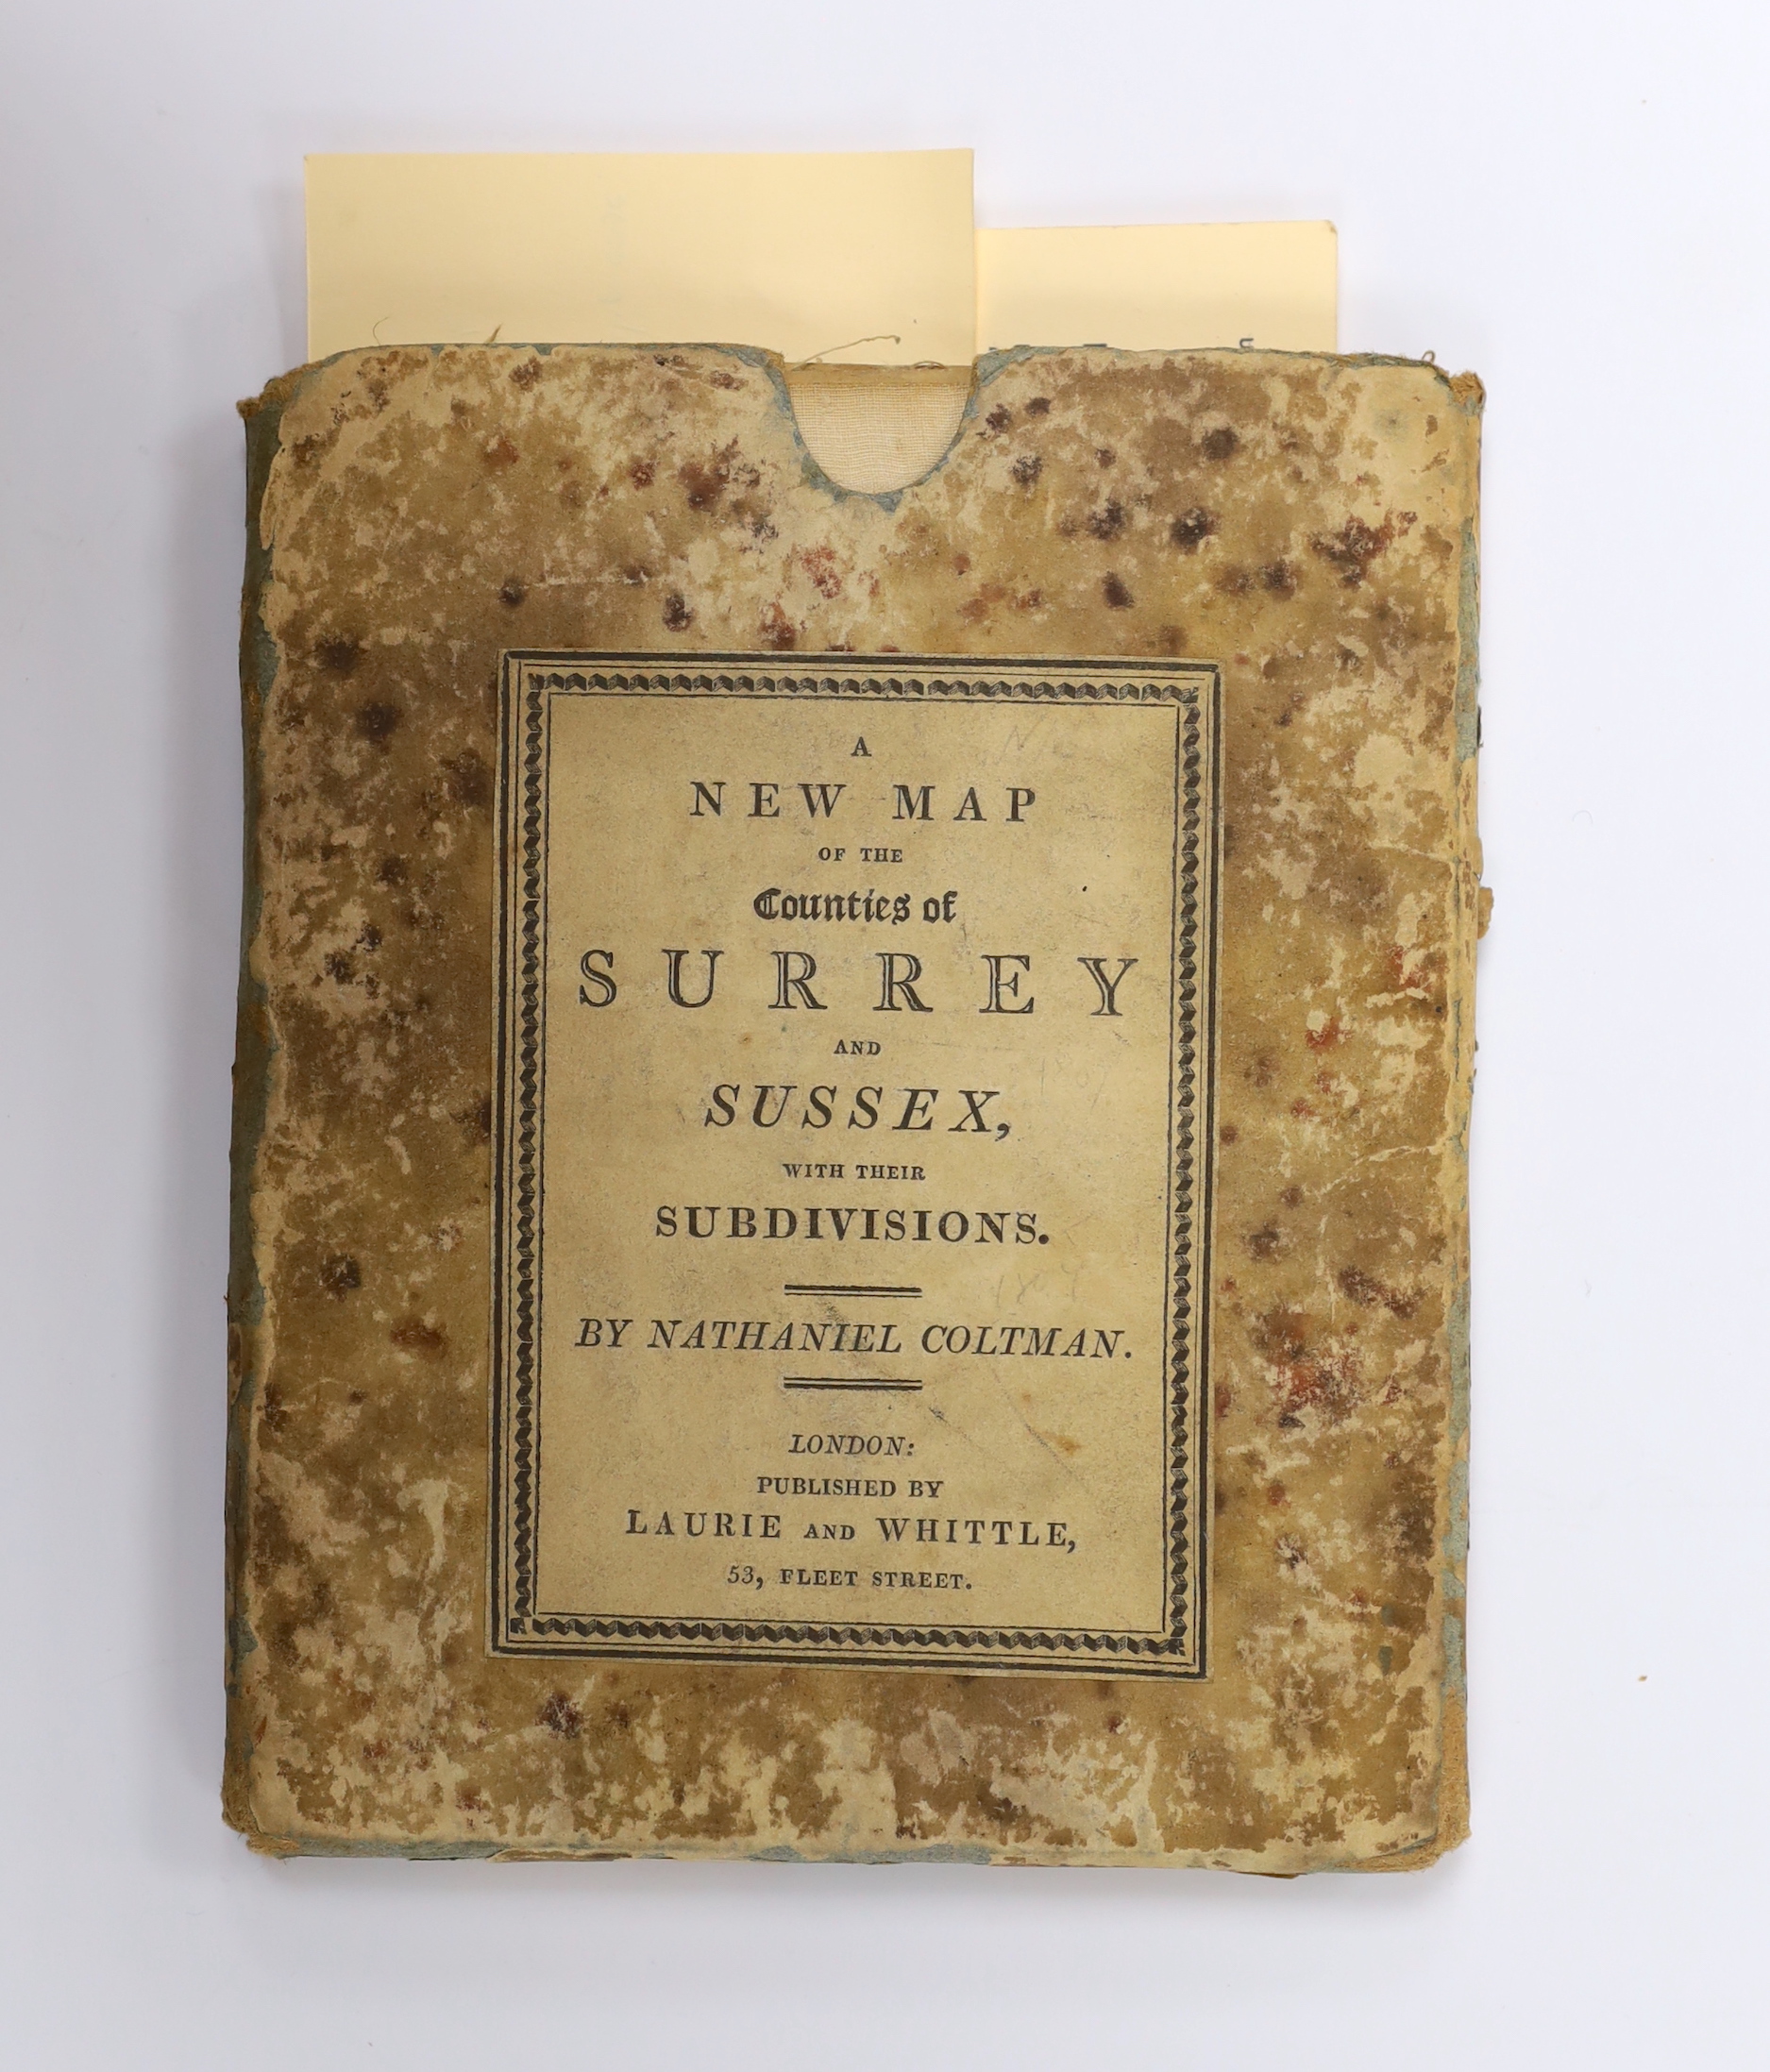 Surrey and Sussex map, by Nathaniel Coltman, pub. Laurie and Whittle, dated 1807, folding map in slip case, 57 x 71cm